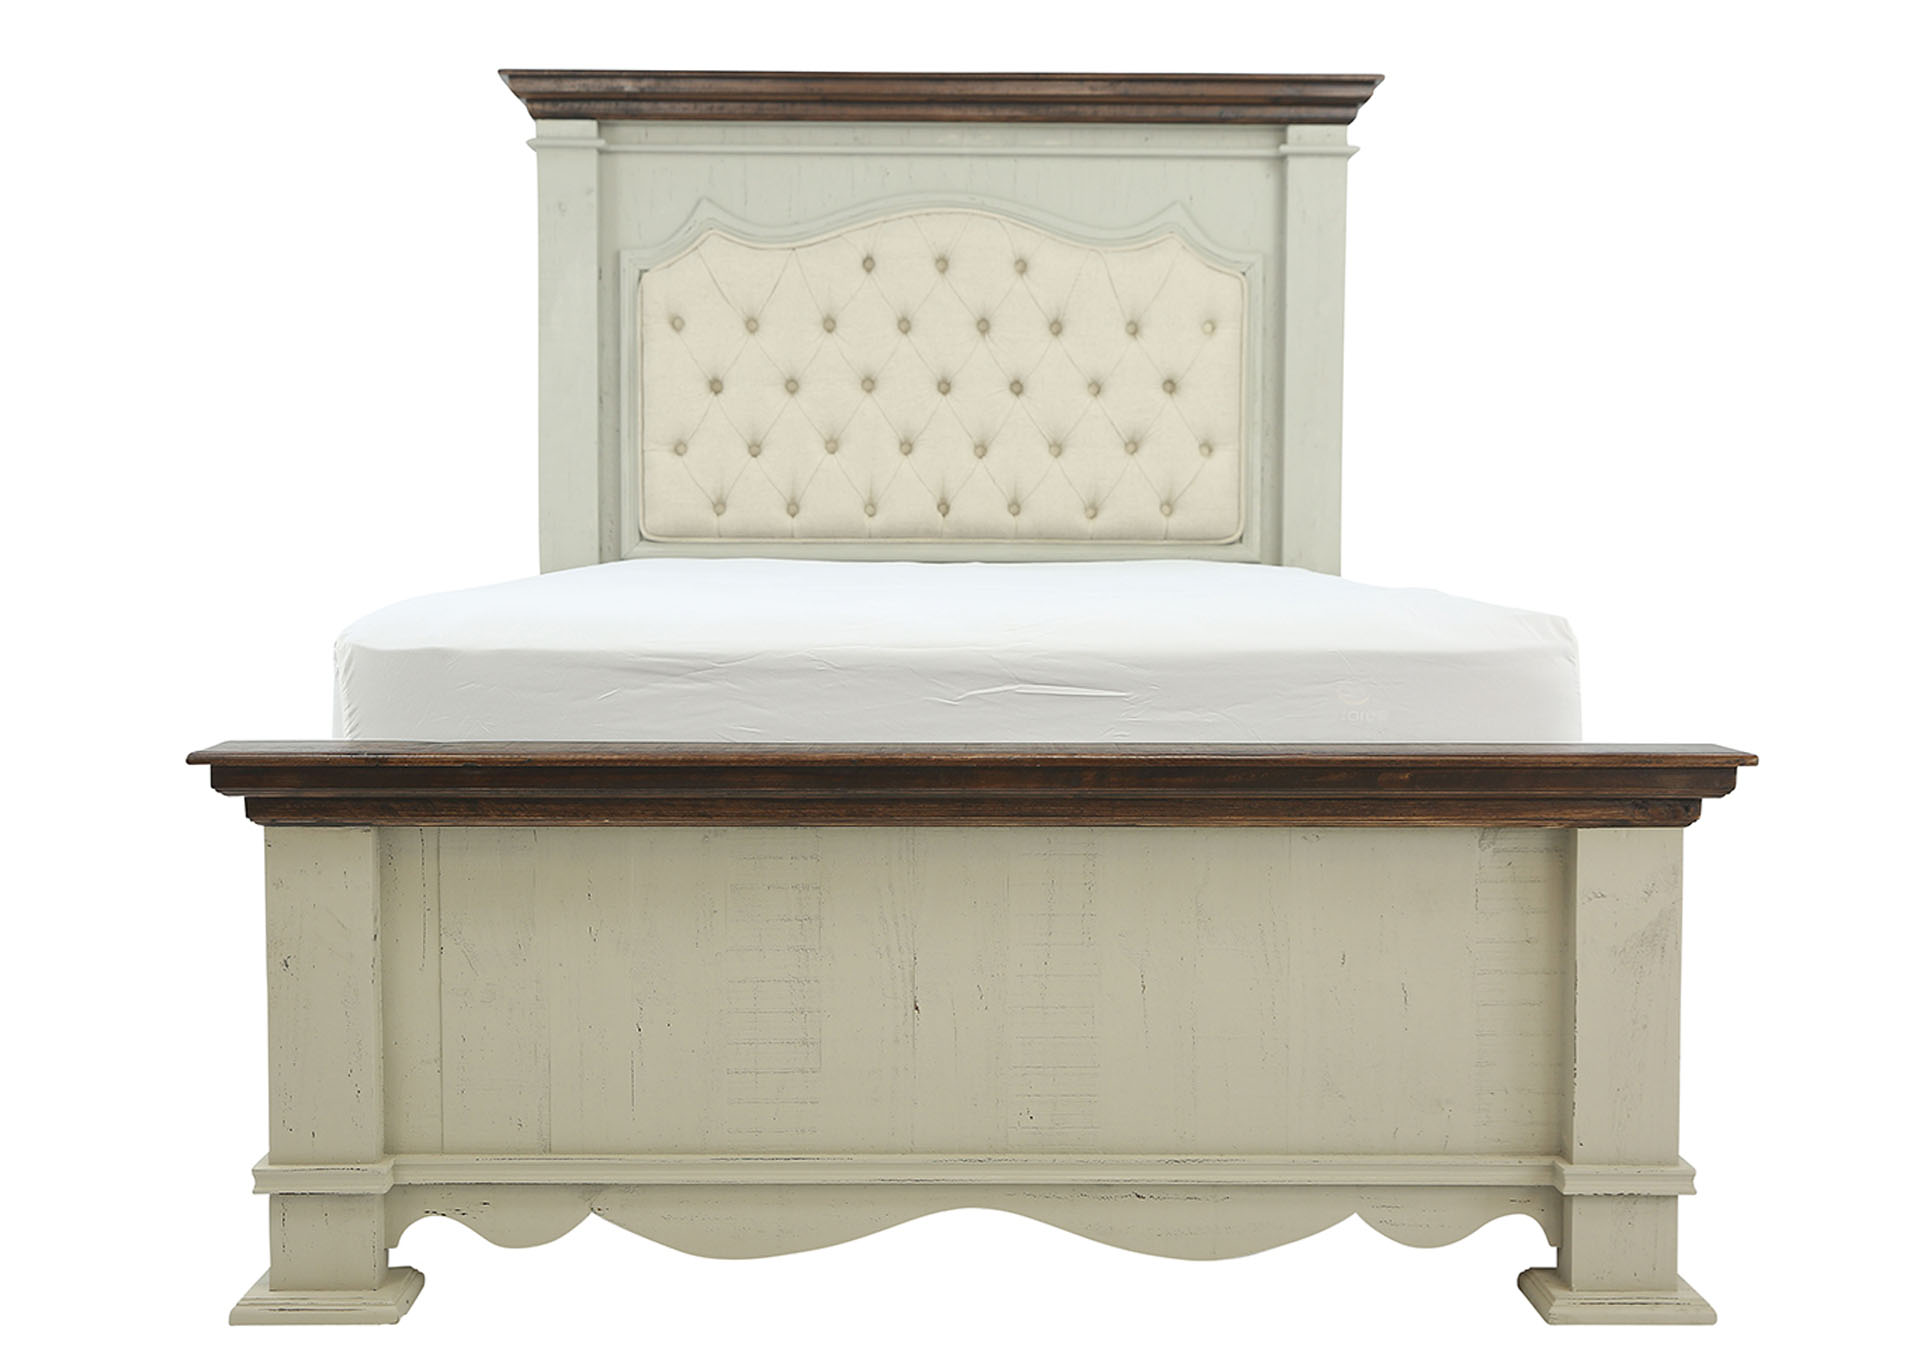 FIFTH AVENUE TWO TONE KING BED,ARDENT HOME